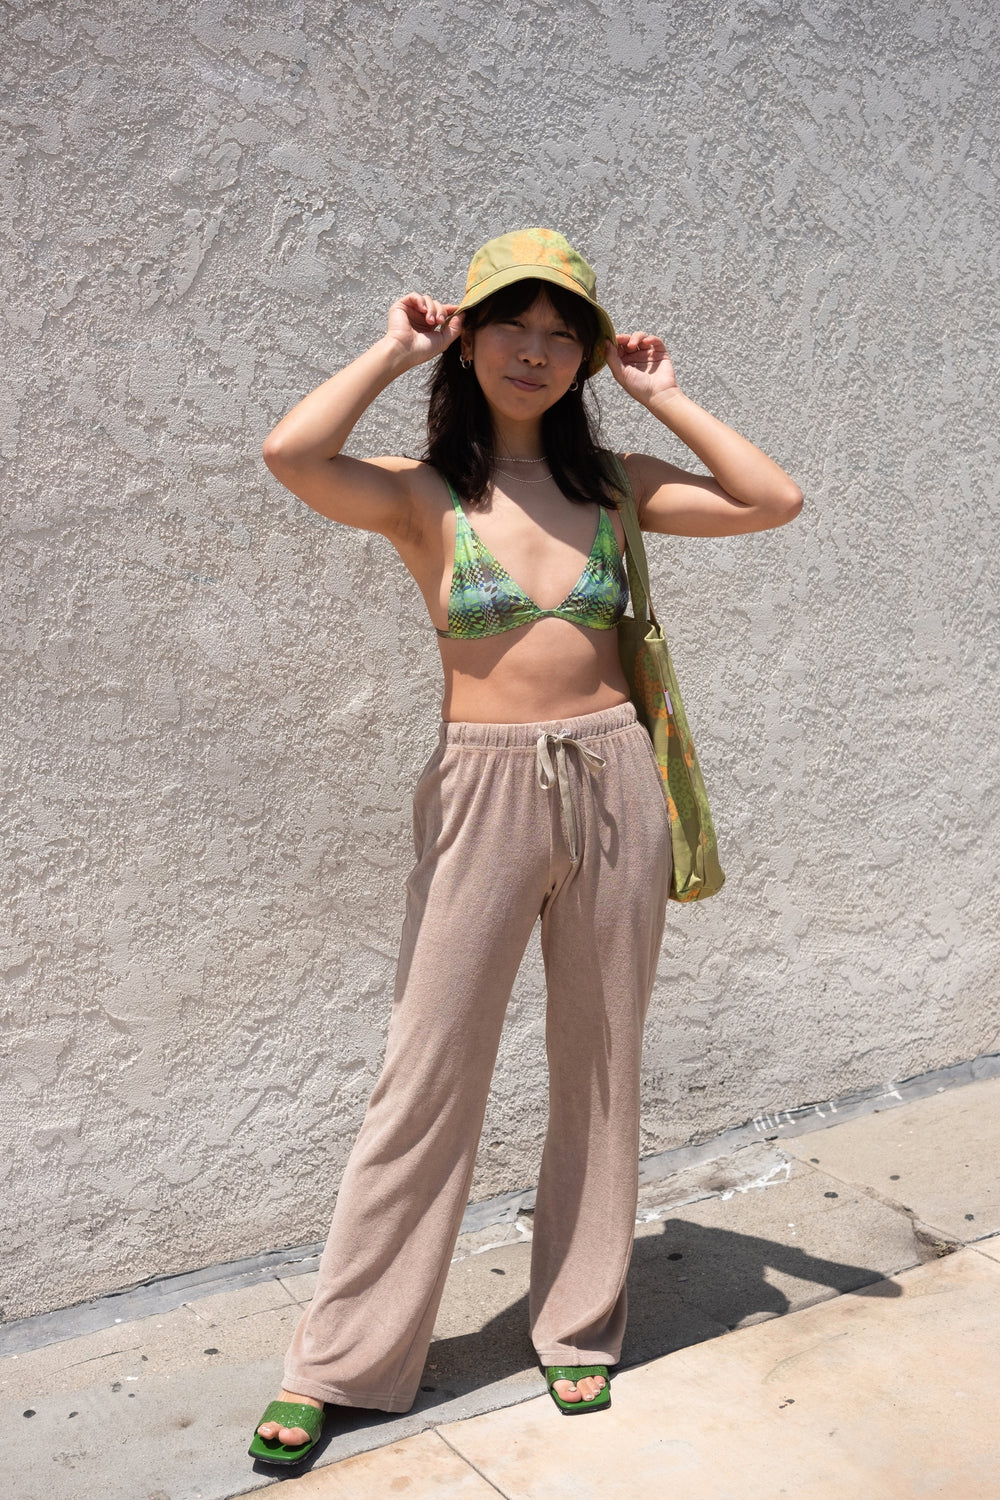 Stone Terry Wide Leg Pant